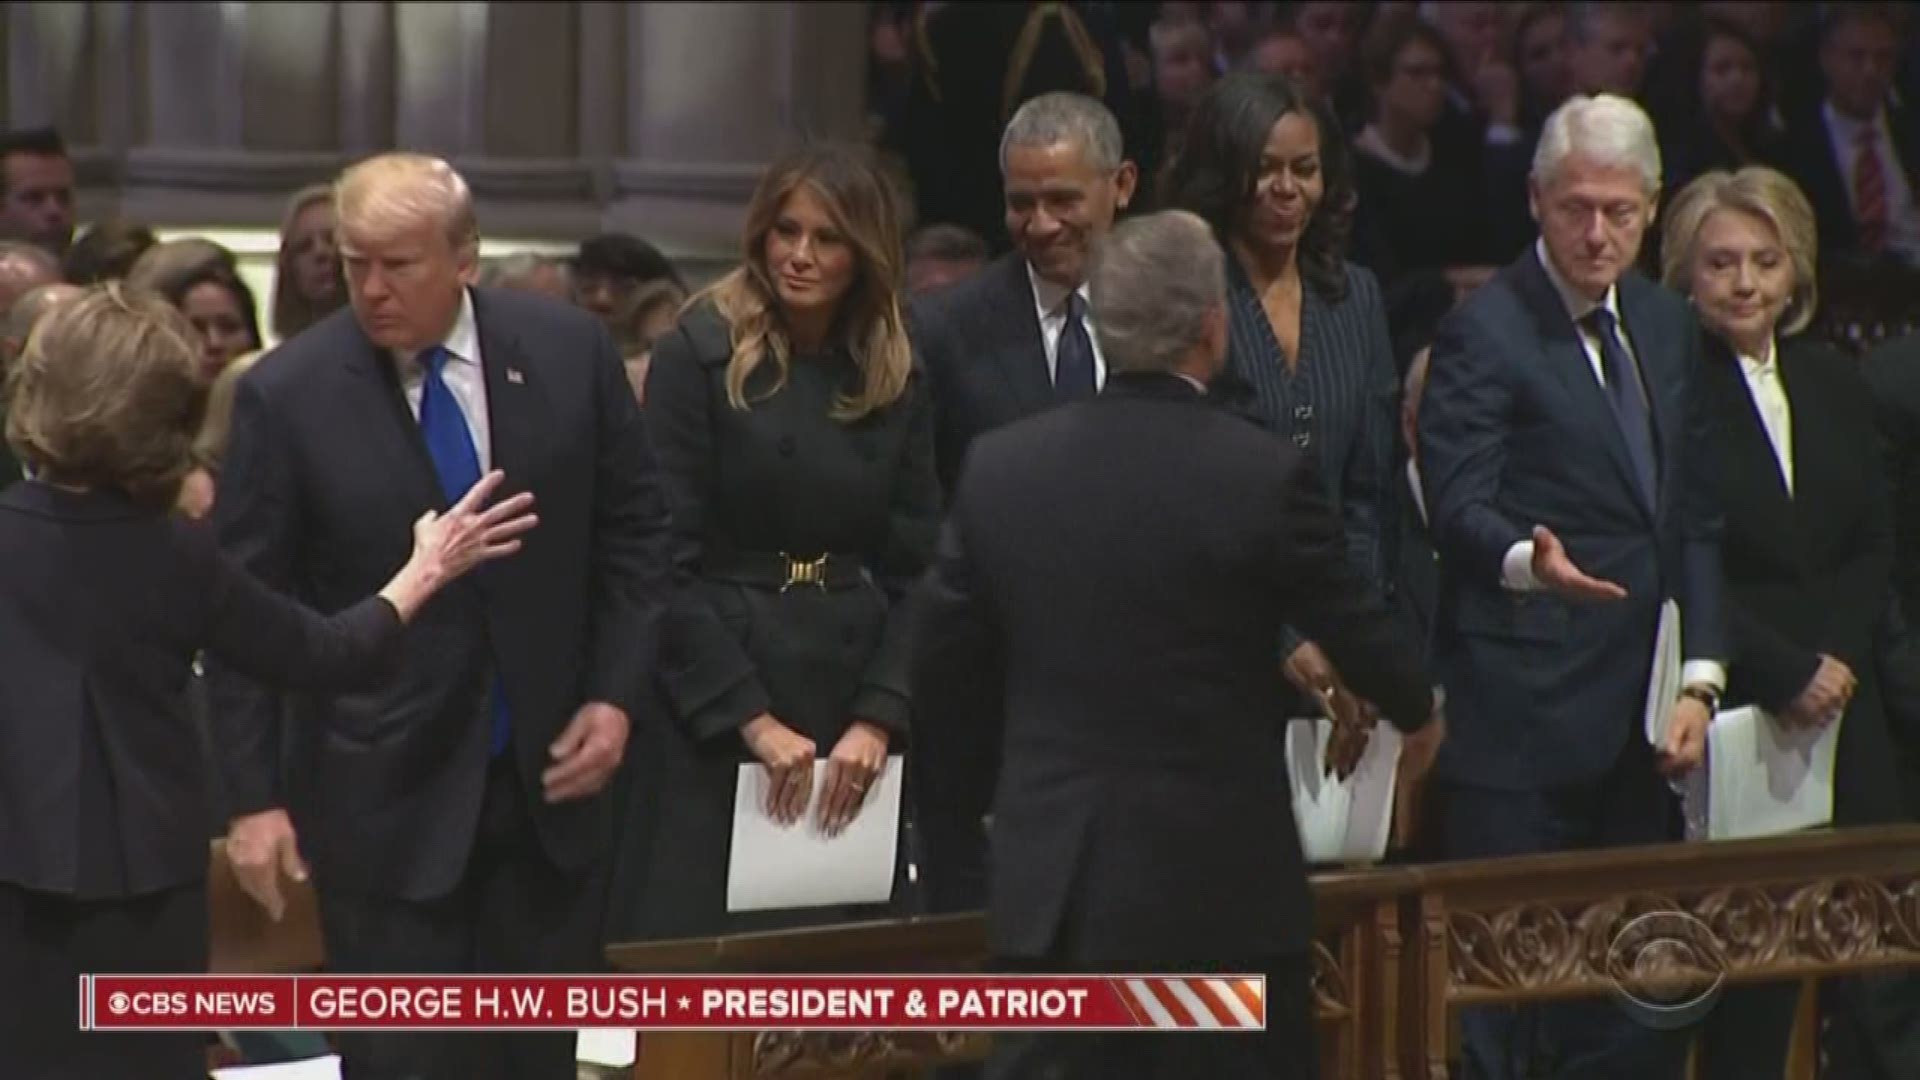 President George W. Bush appears to have given Michelle more candy! The cute moment happened at the start of President George H.W. Bush's funeral.